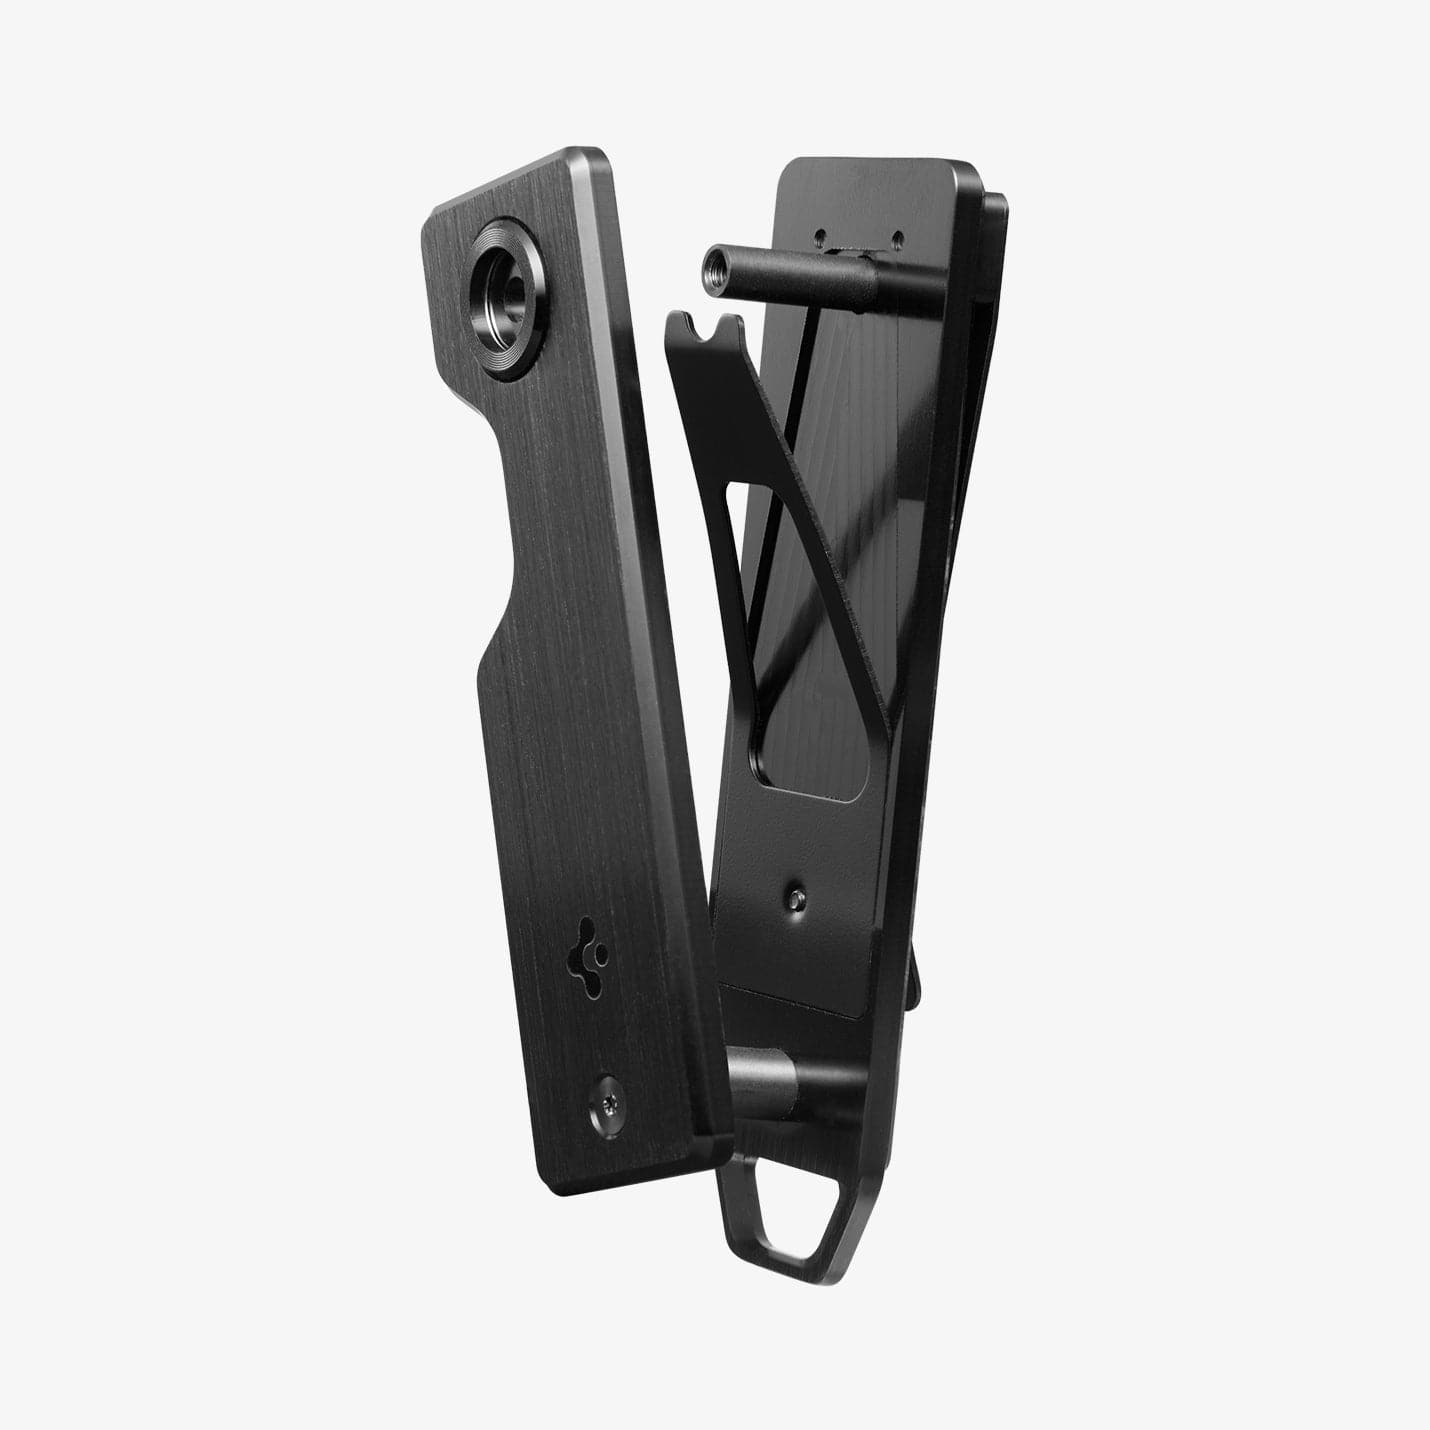 AHP05320 - Key Holder Organizer Metal Fit in black showing the back and inside with organizer top pulled apart